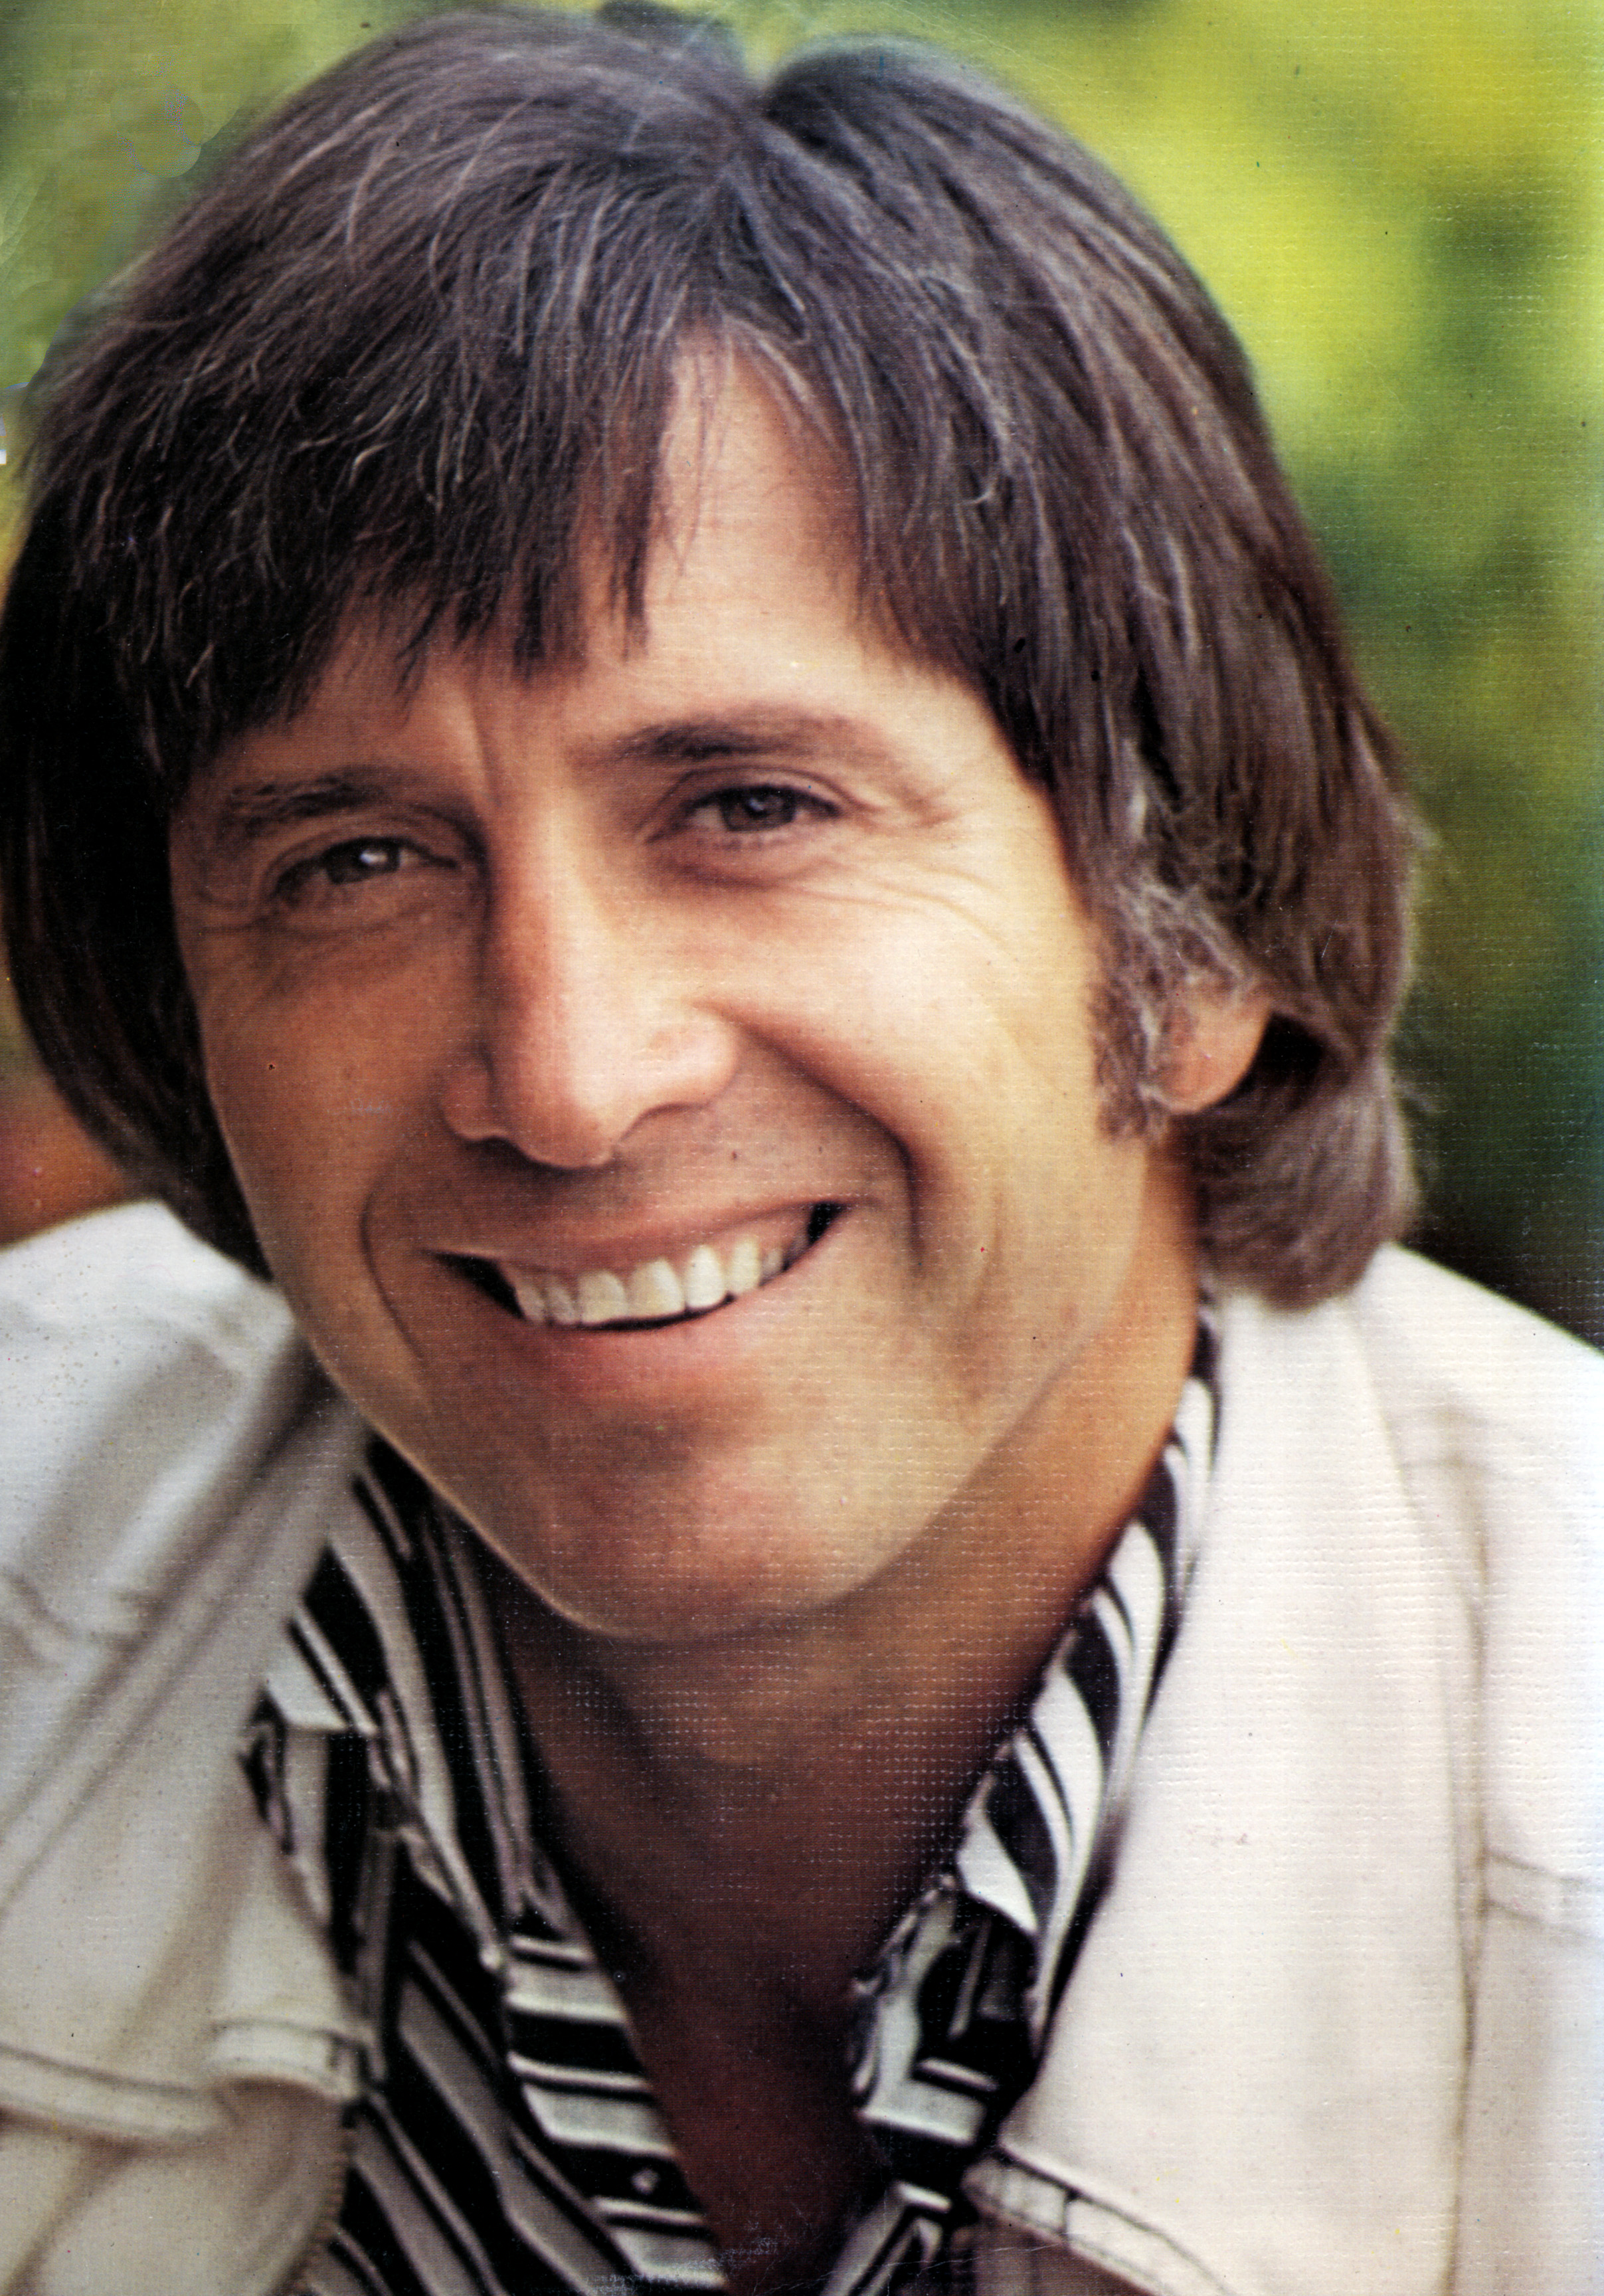 Late singer Vince Hill is best known for his cover of Edelweiss